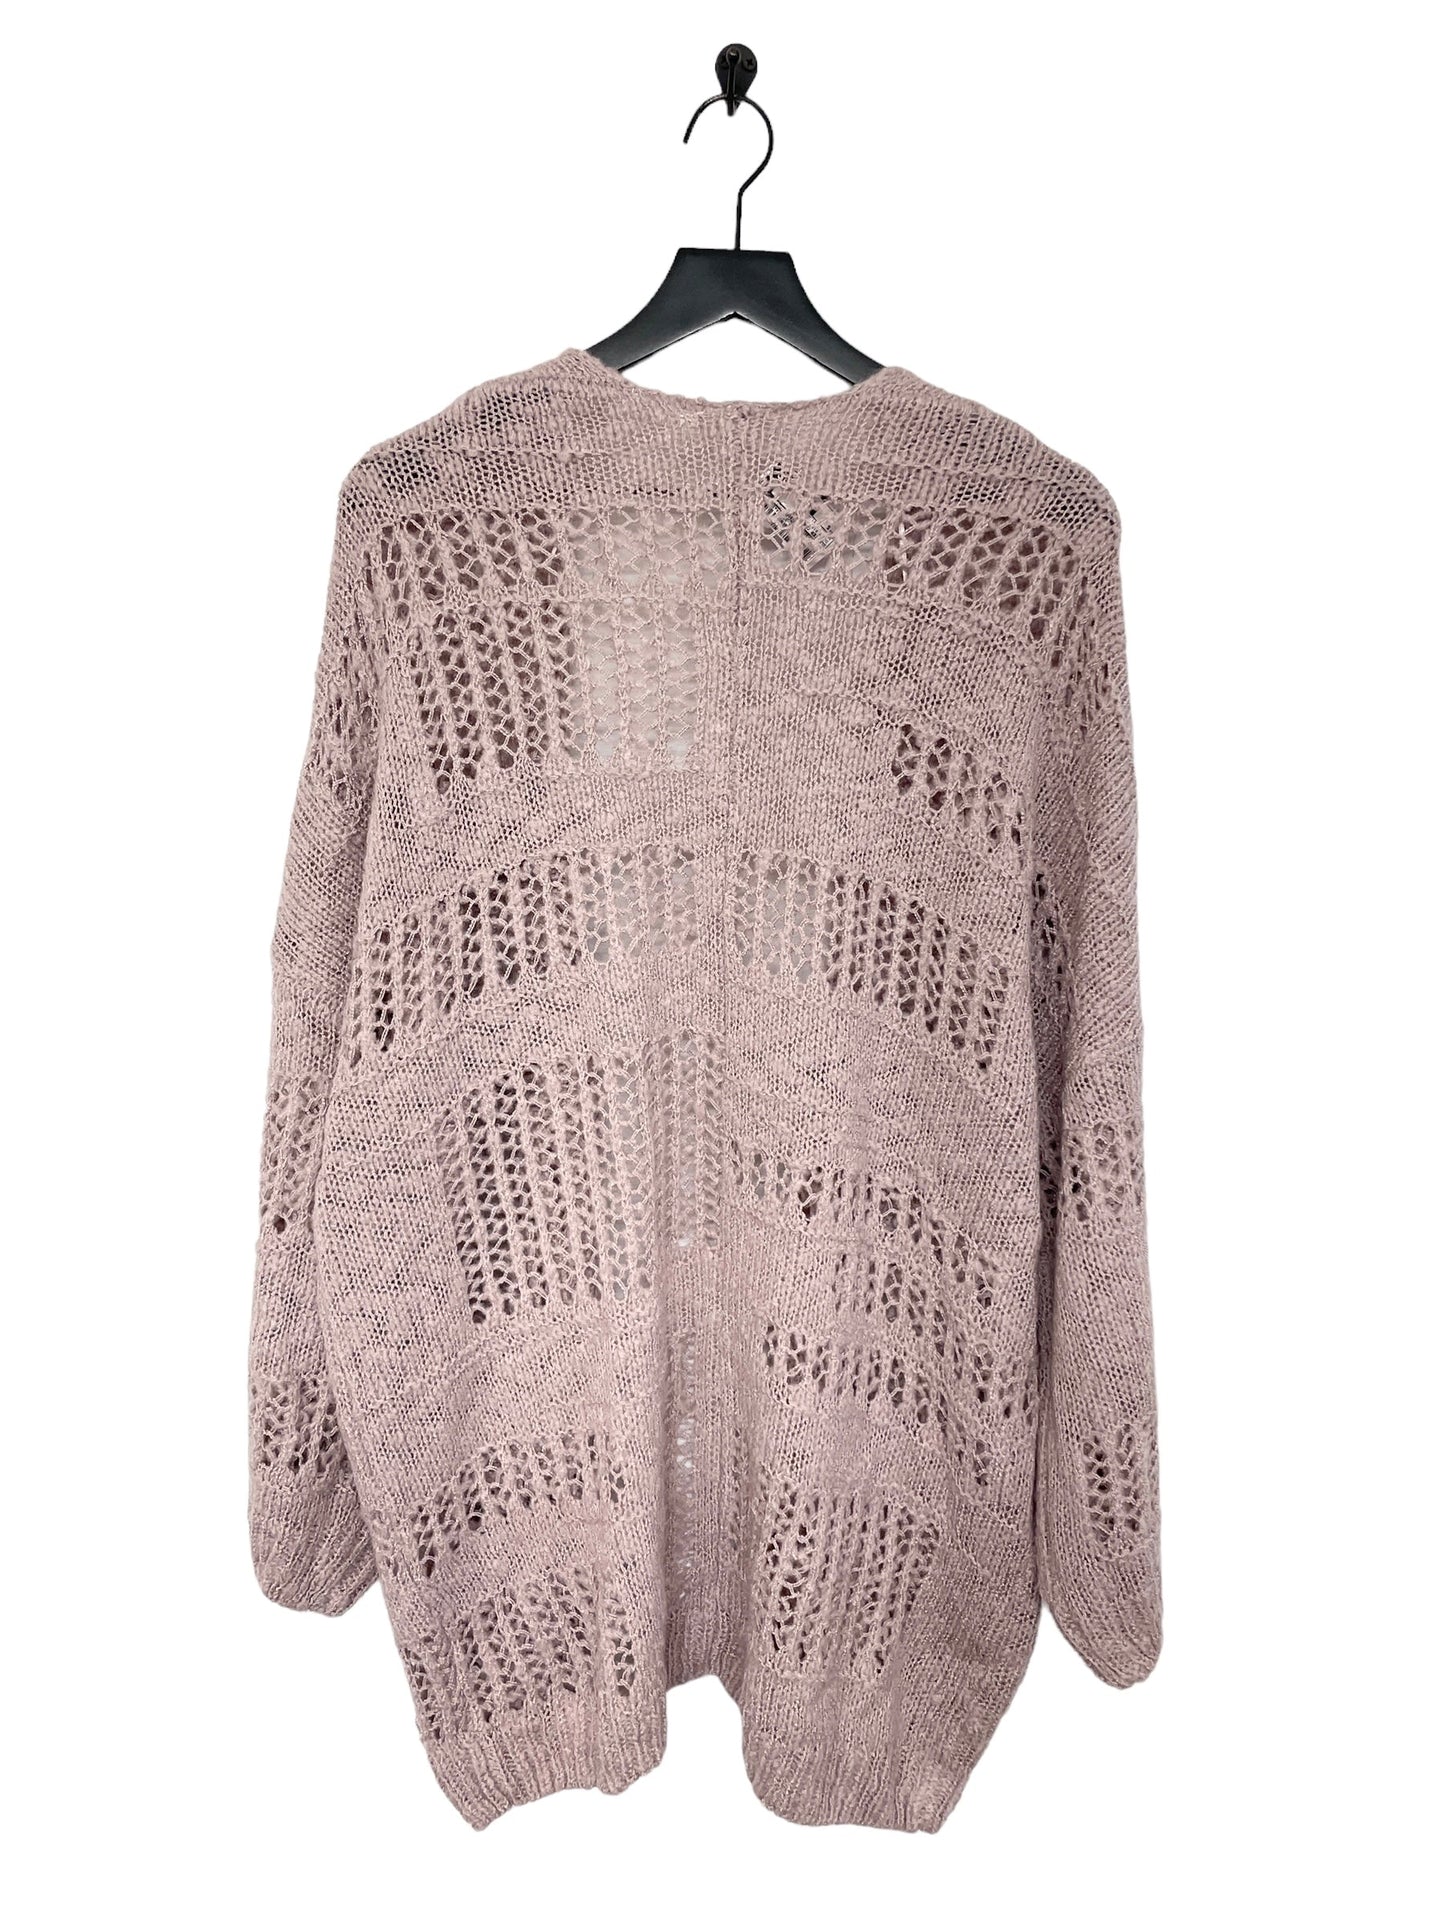 Dusty Pink Sweater Cardigan Clothes Mentor, Size S